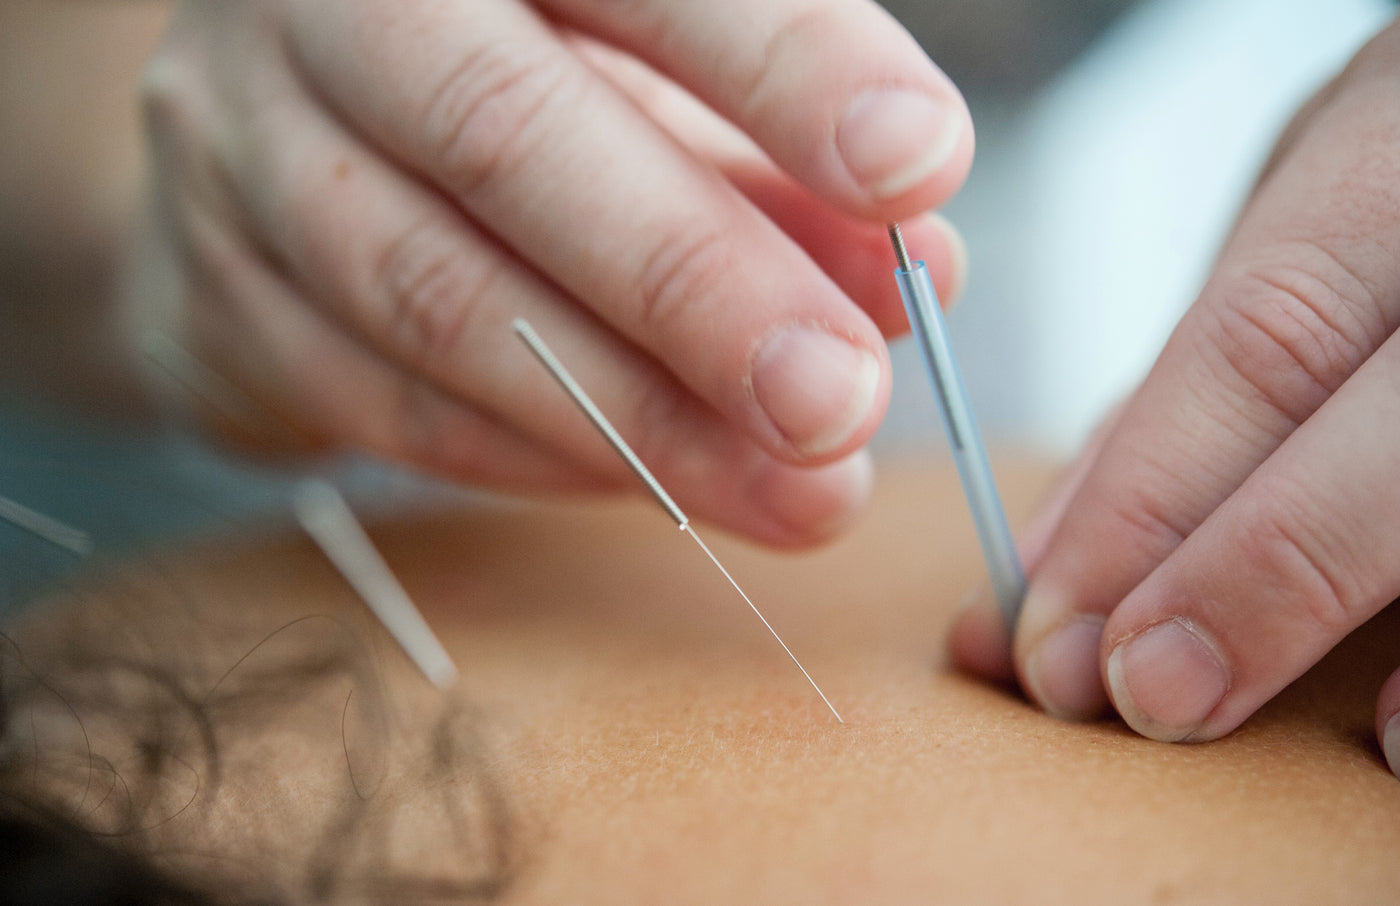 Acupuncture: A Comprehensive Guide to What You Need To Know - Benefits, Safety, and More